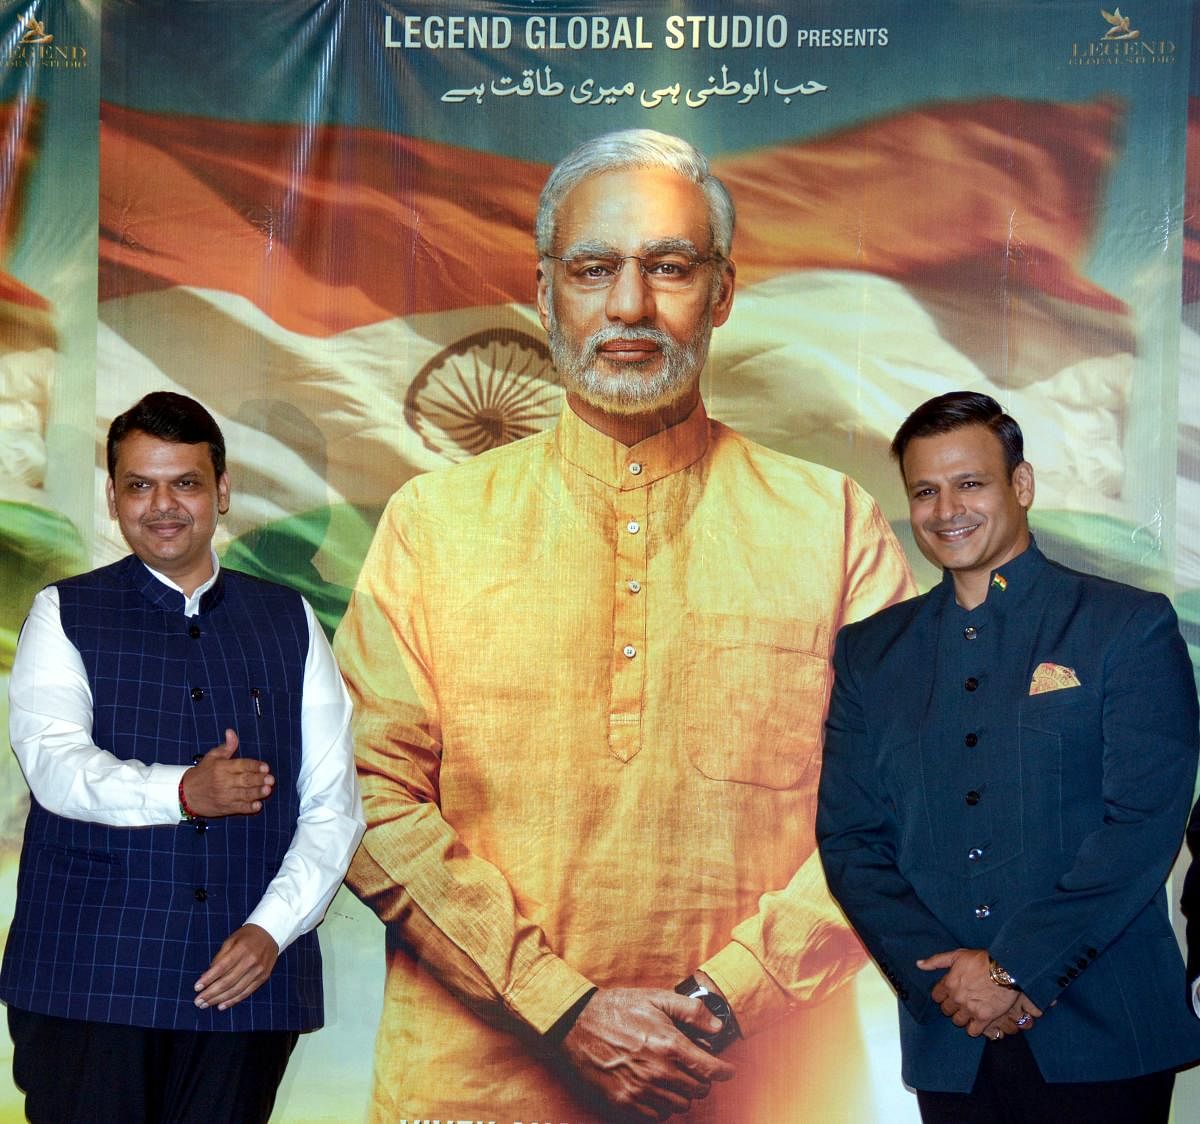 He expressed apprehension that Vivek Oberoi-starrer biopic on Modi may influence the electorates to vote for particular candidates during the general elections 2019. (PTI File Photo)